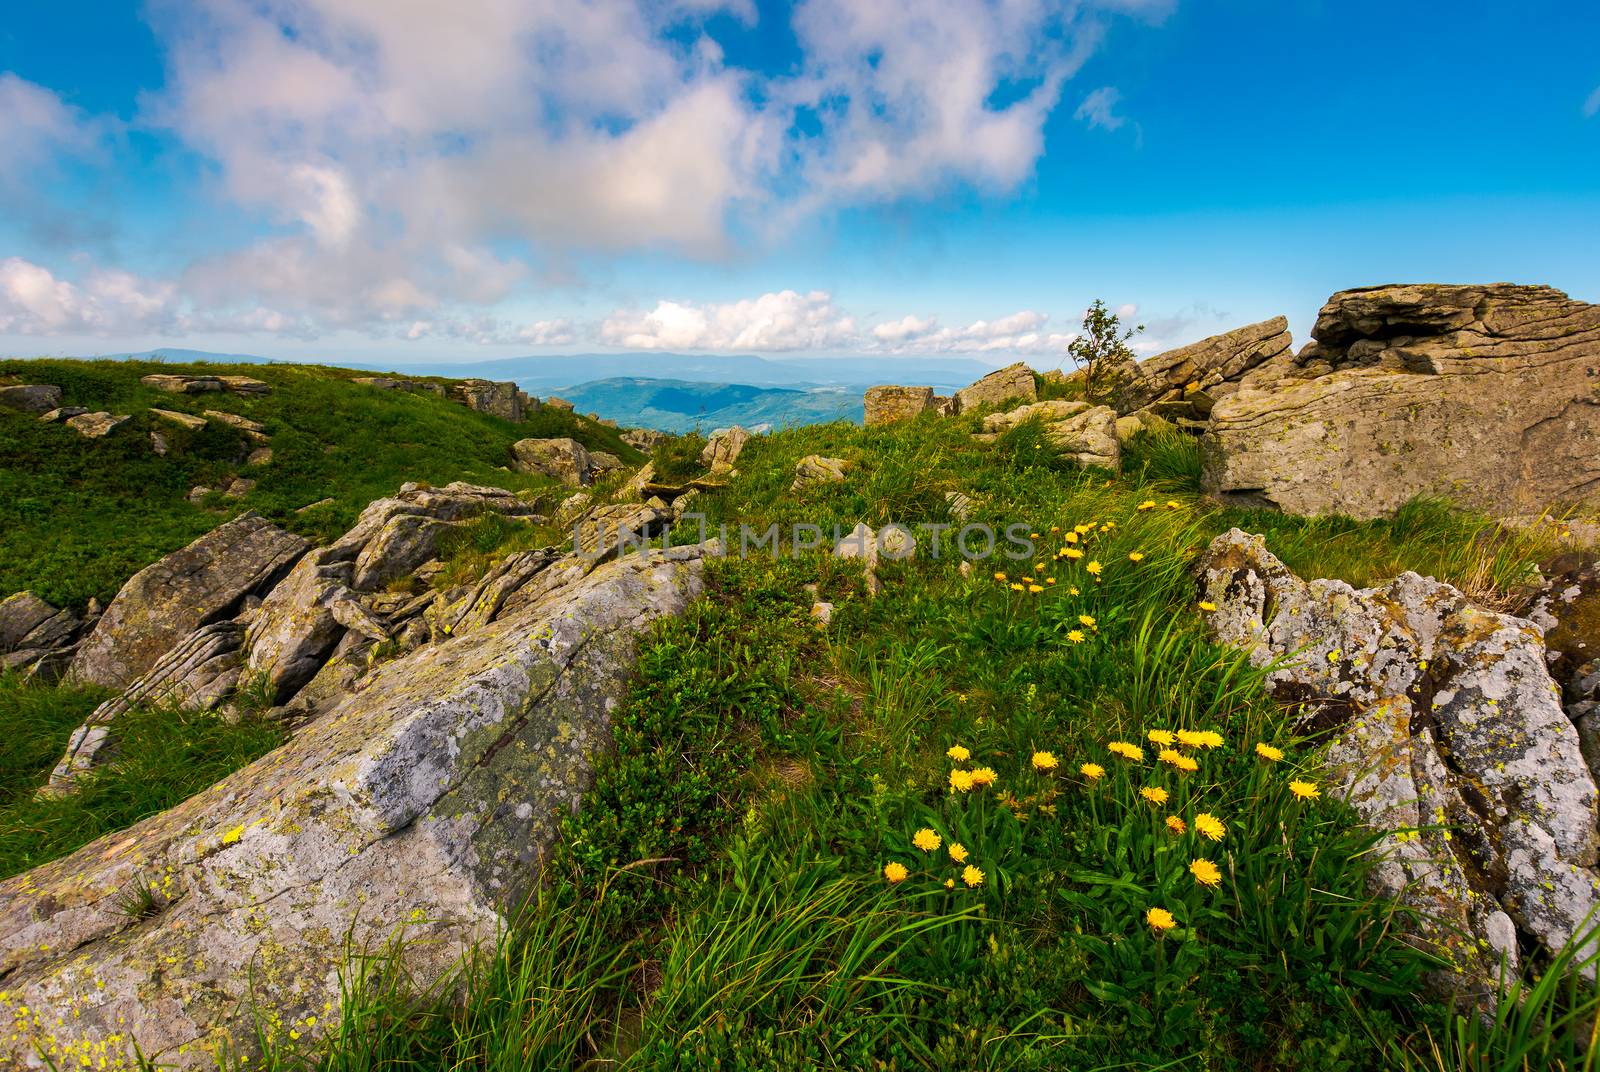 Dandelions among the rocks in Carpathian Alps. Heavy cloud on a blue sky over the mountain peak in the distance.  Vivid summer landscape at sunset.